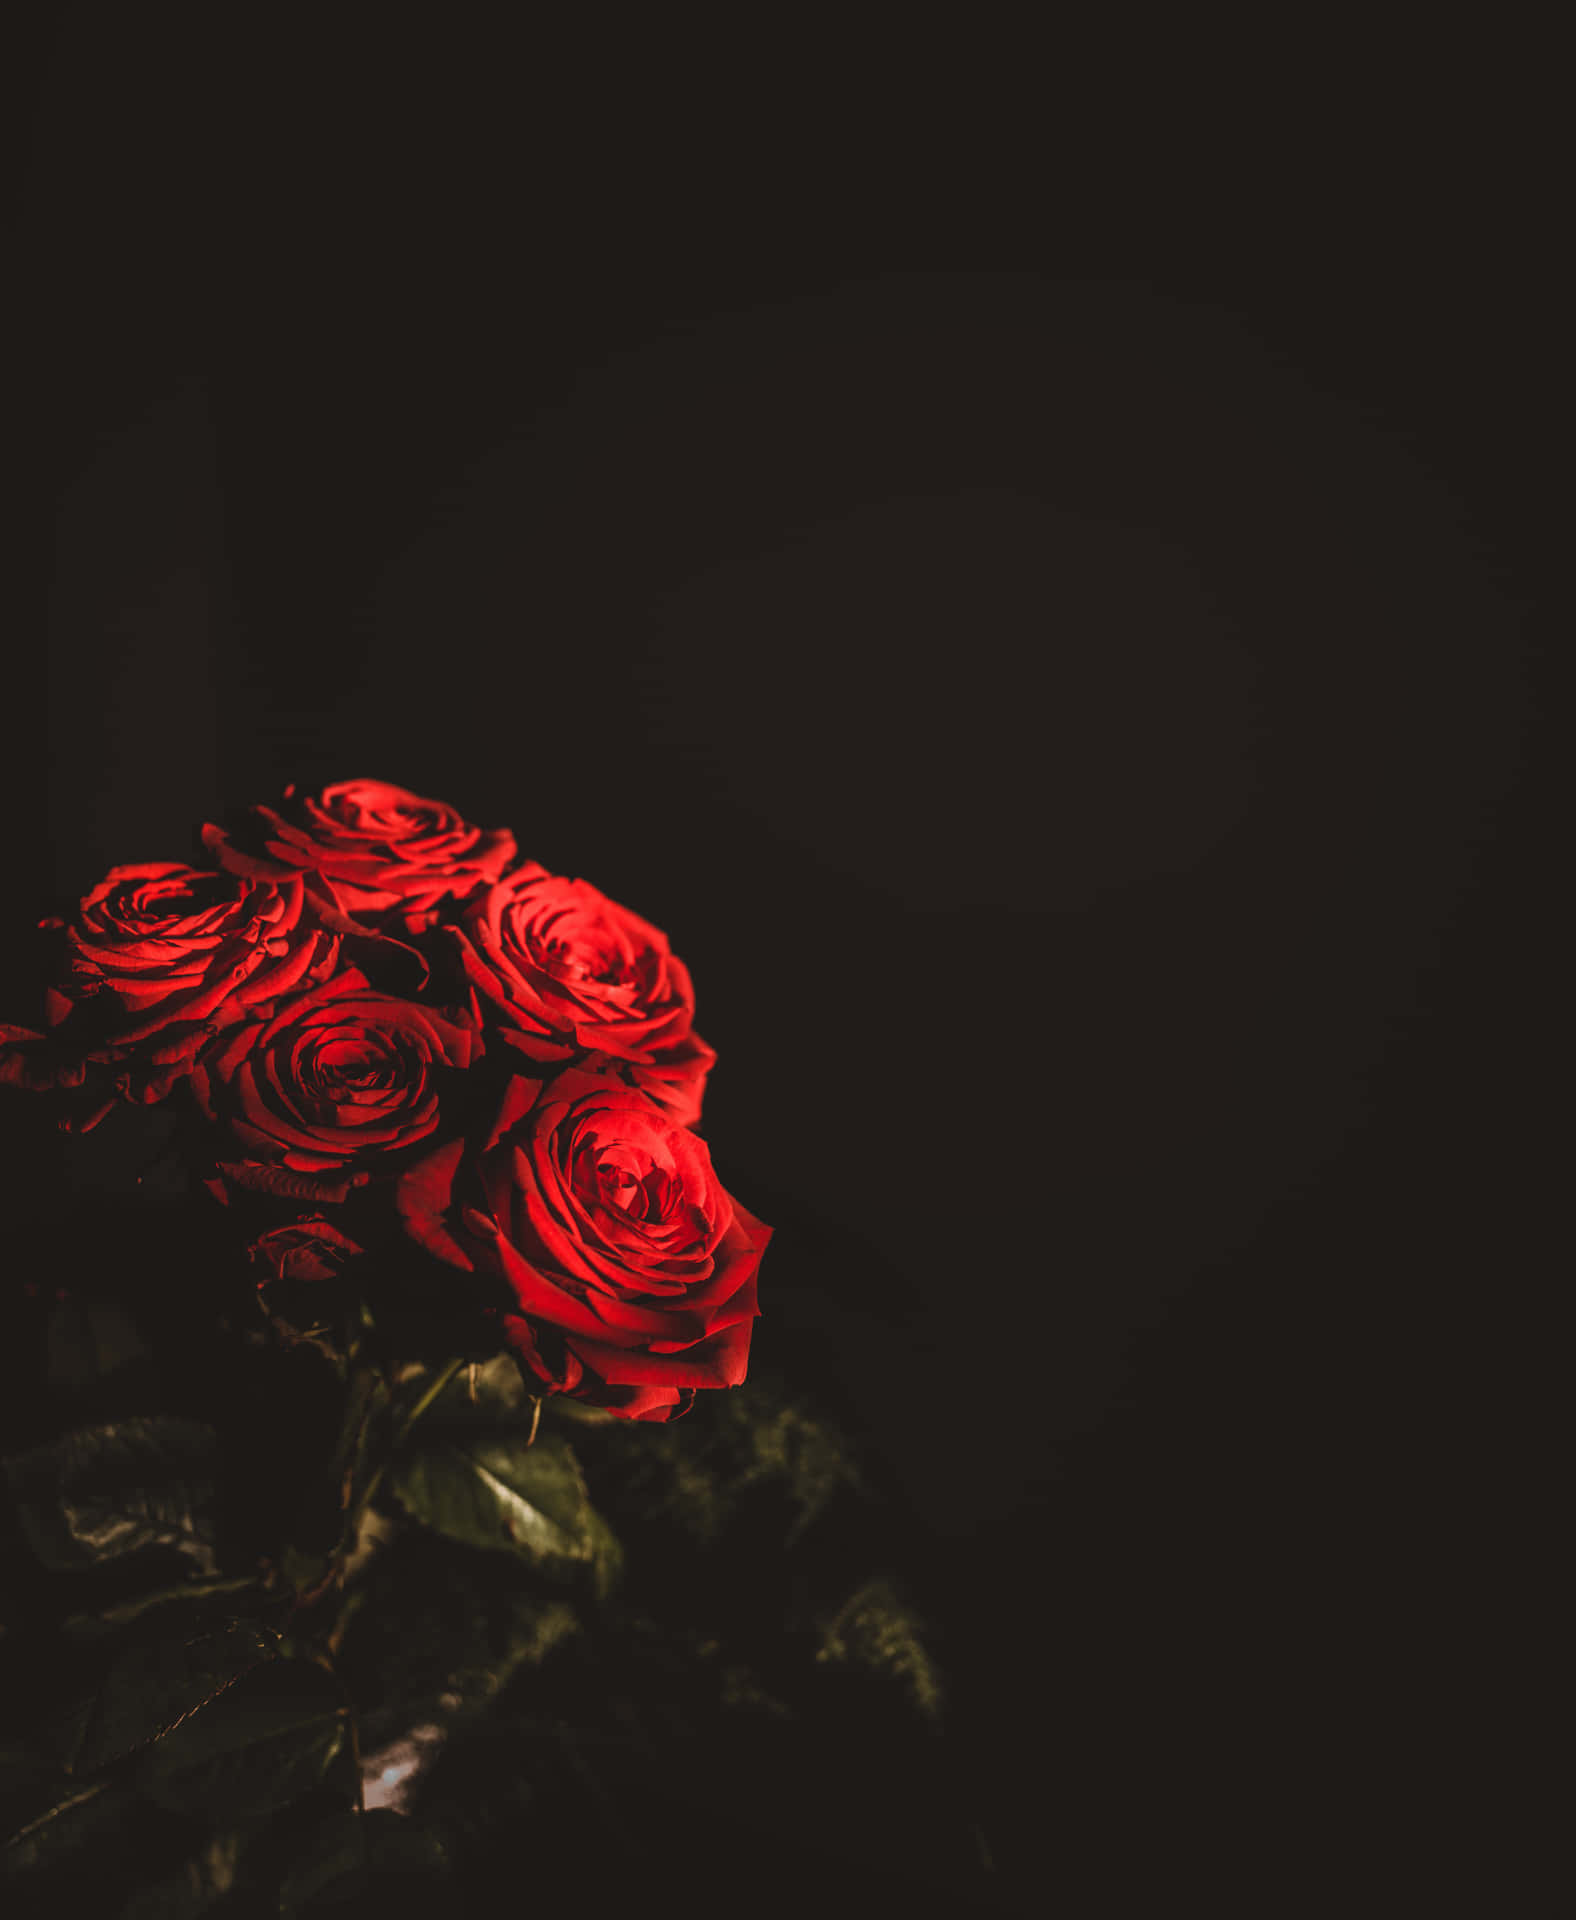 Download A Bouquet Of Red Roses On A Black Background | Wallpapers.com